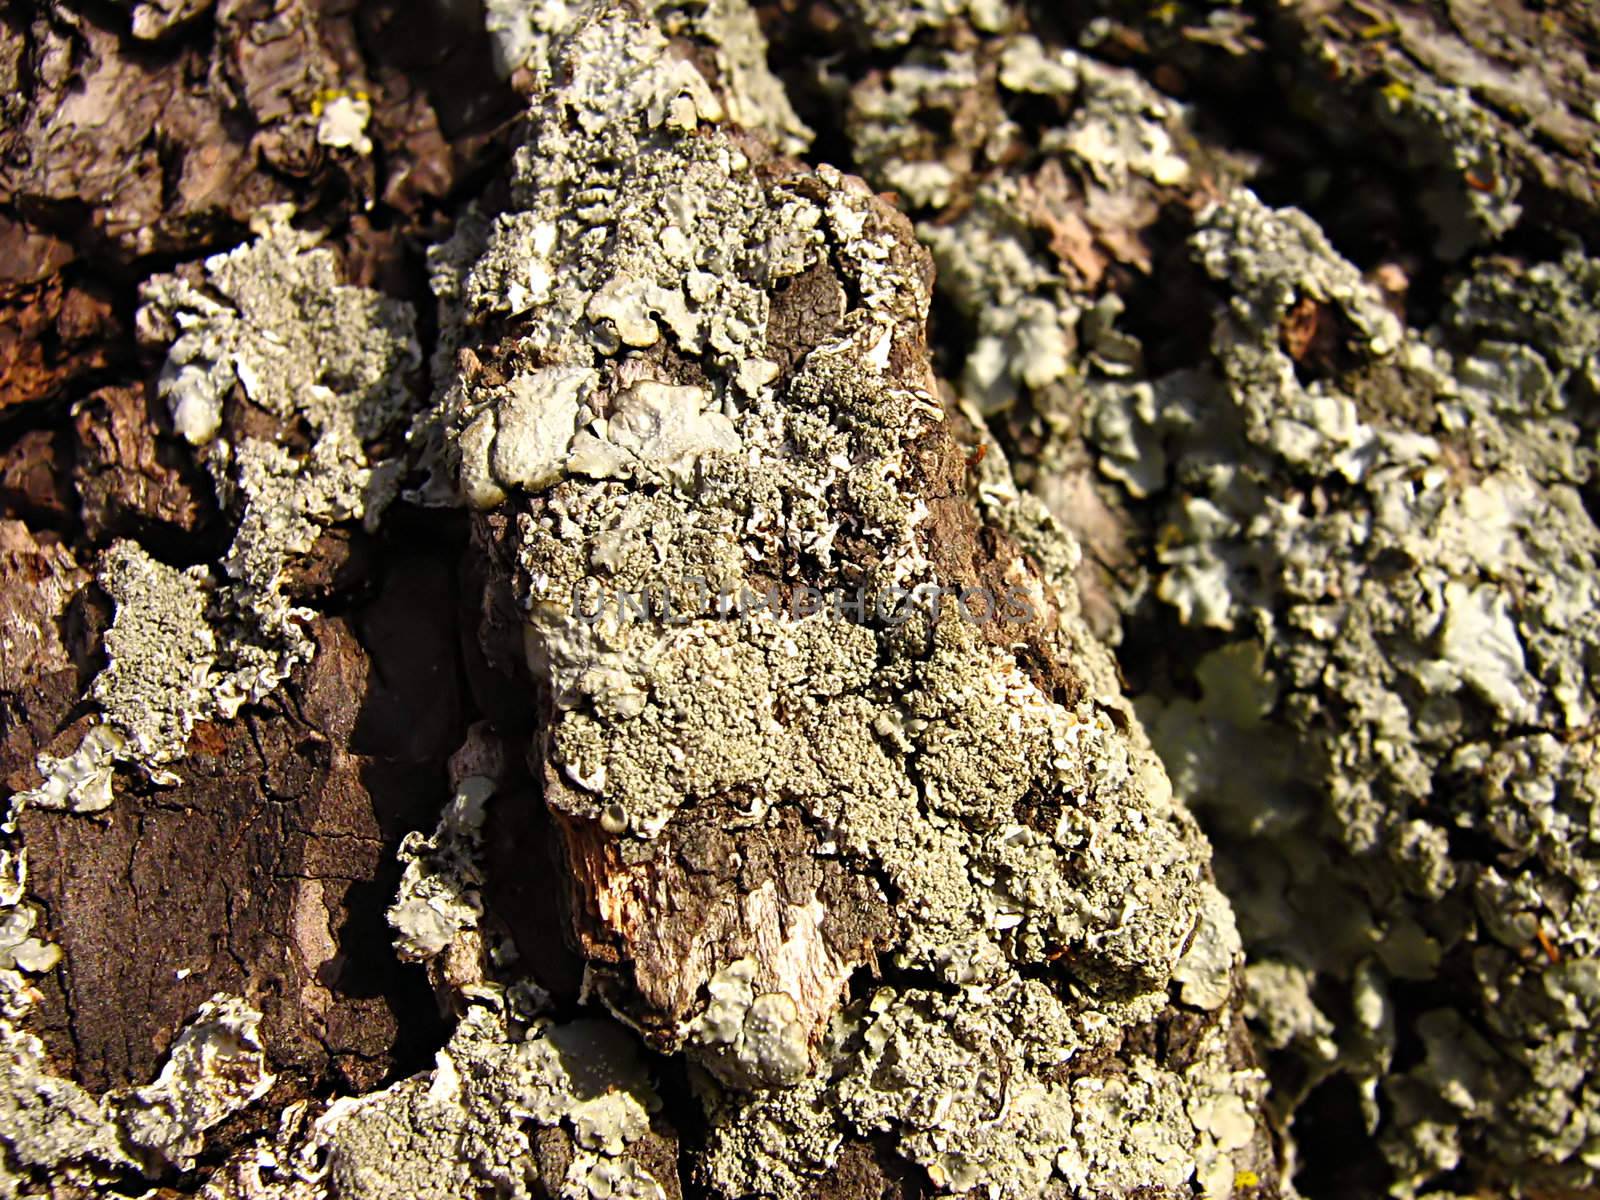 A photograph of lichen and tree bark detailing their textures.